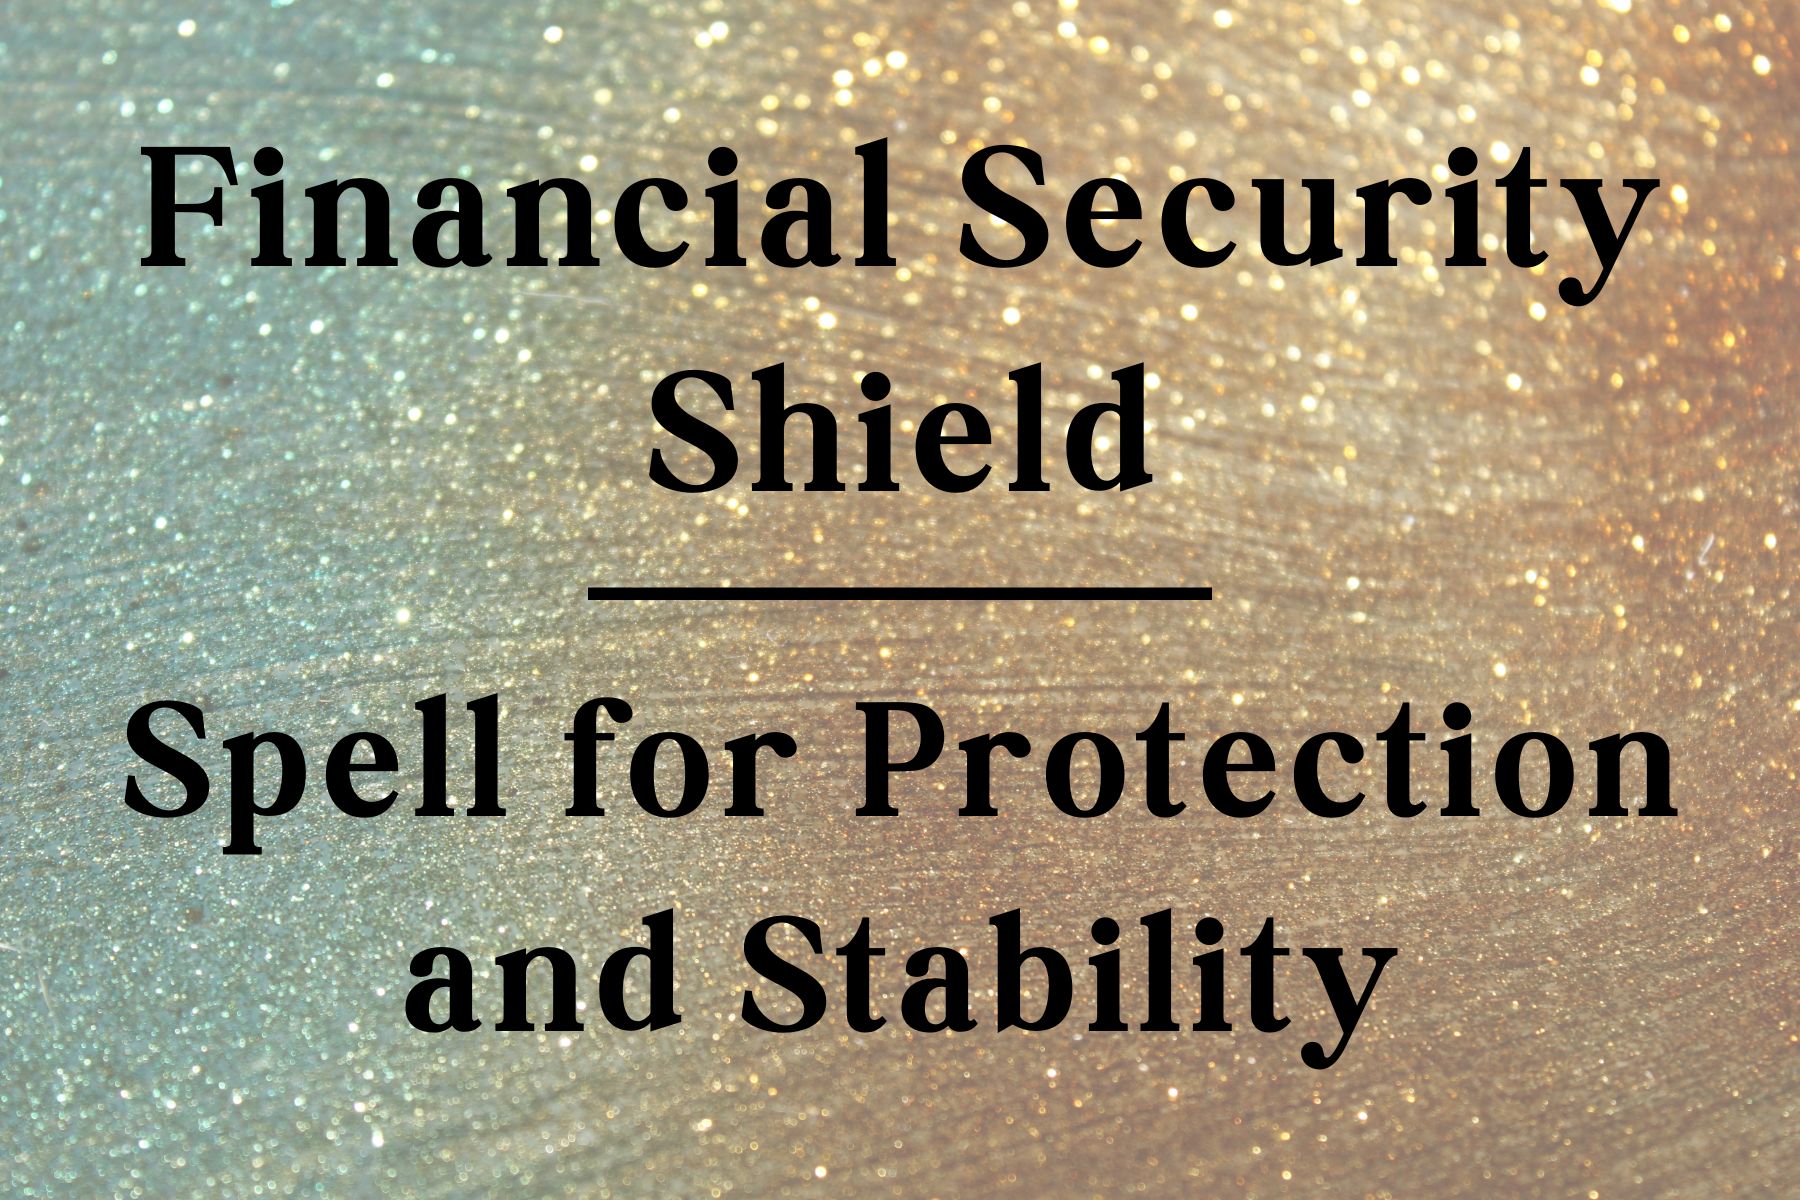 Financial Security Shield: Spell for Protection and Stability